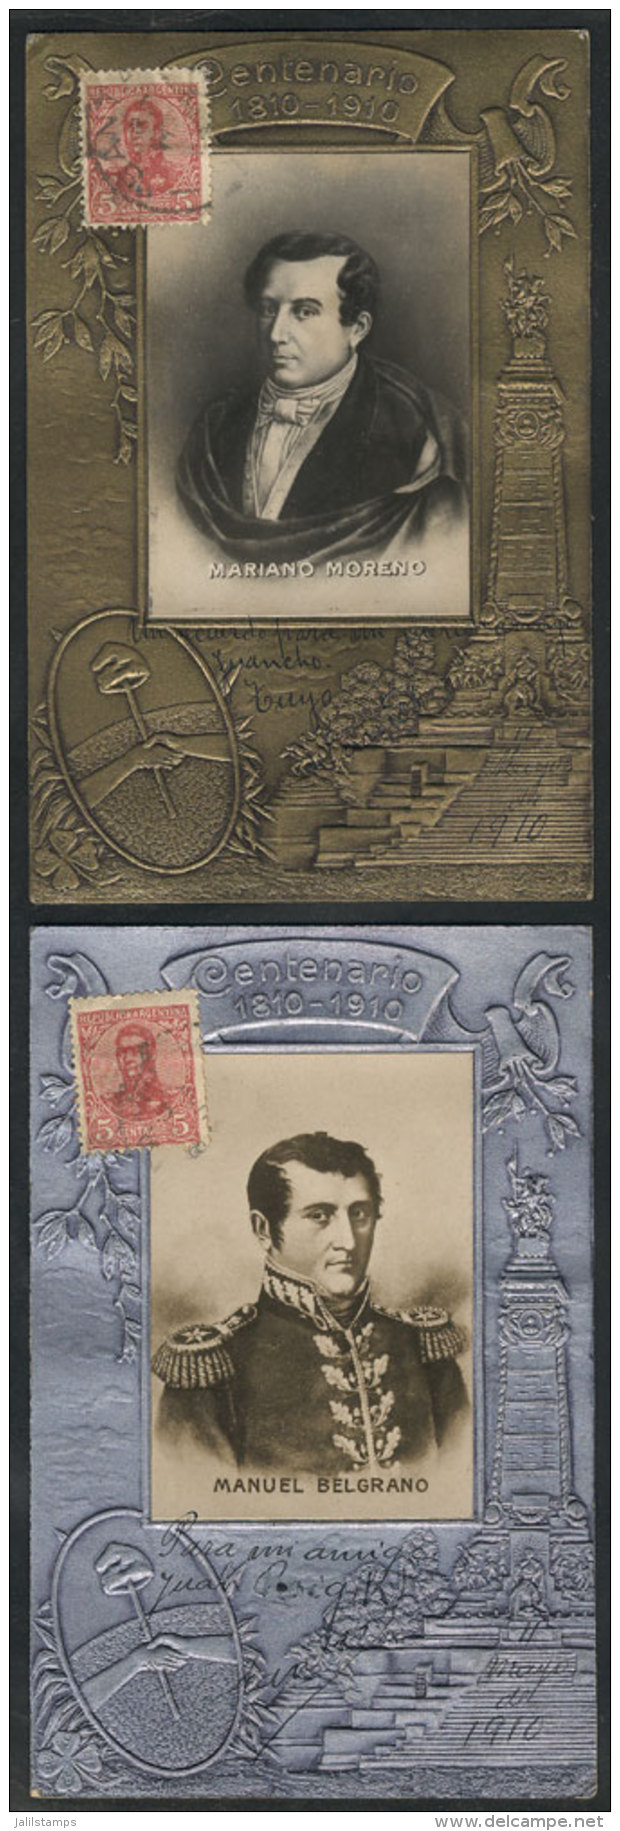 Centenary Of 1810: 2 Rare PCs With Views Of Mariano Moreno And Manuel Belgrano With Embossed Details, VF Quality,... - Argentina